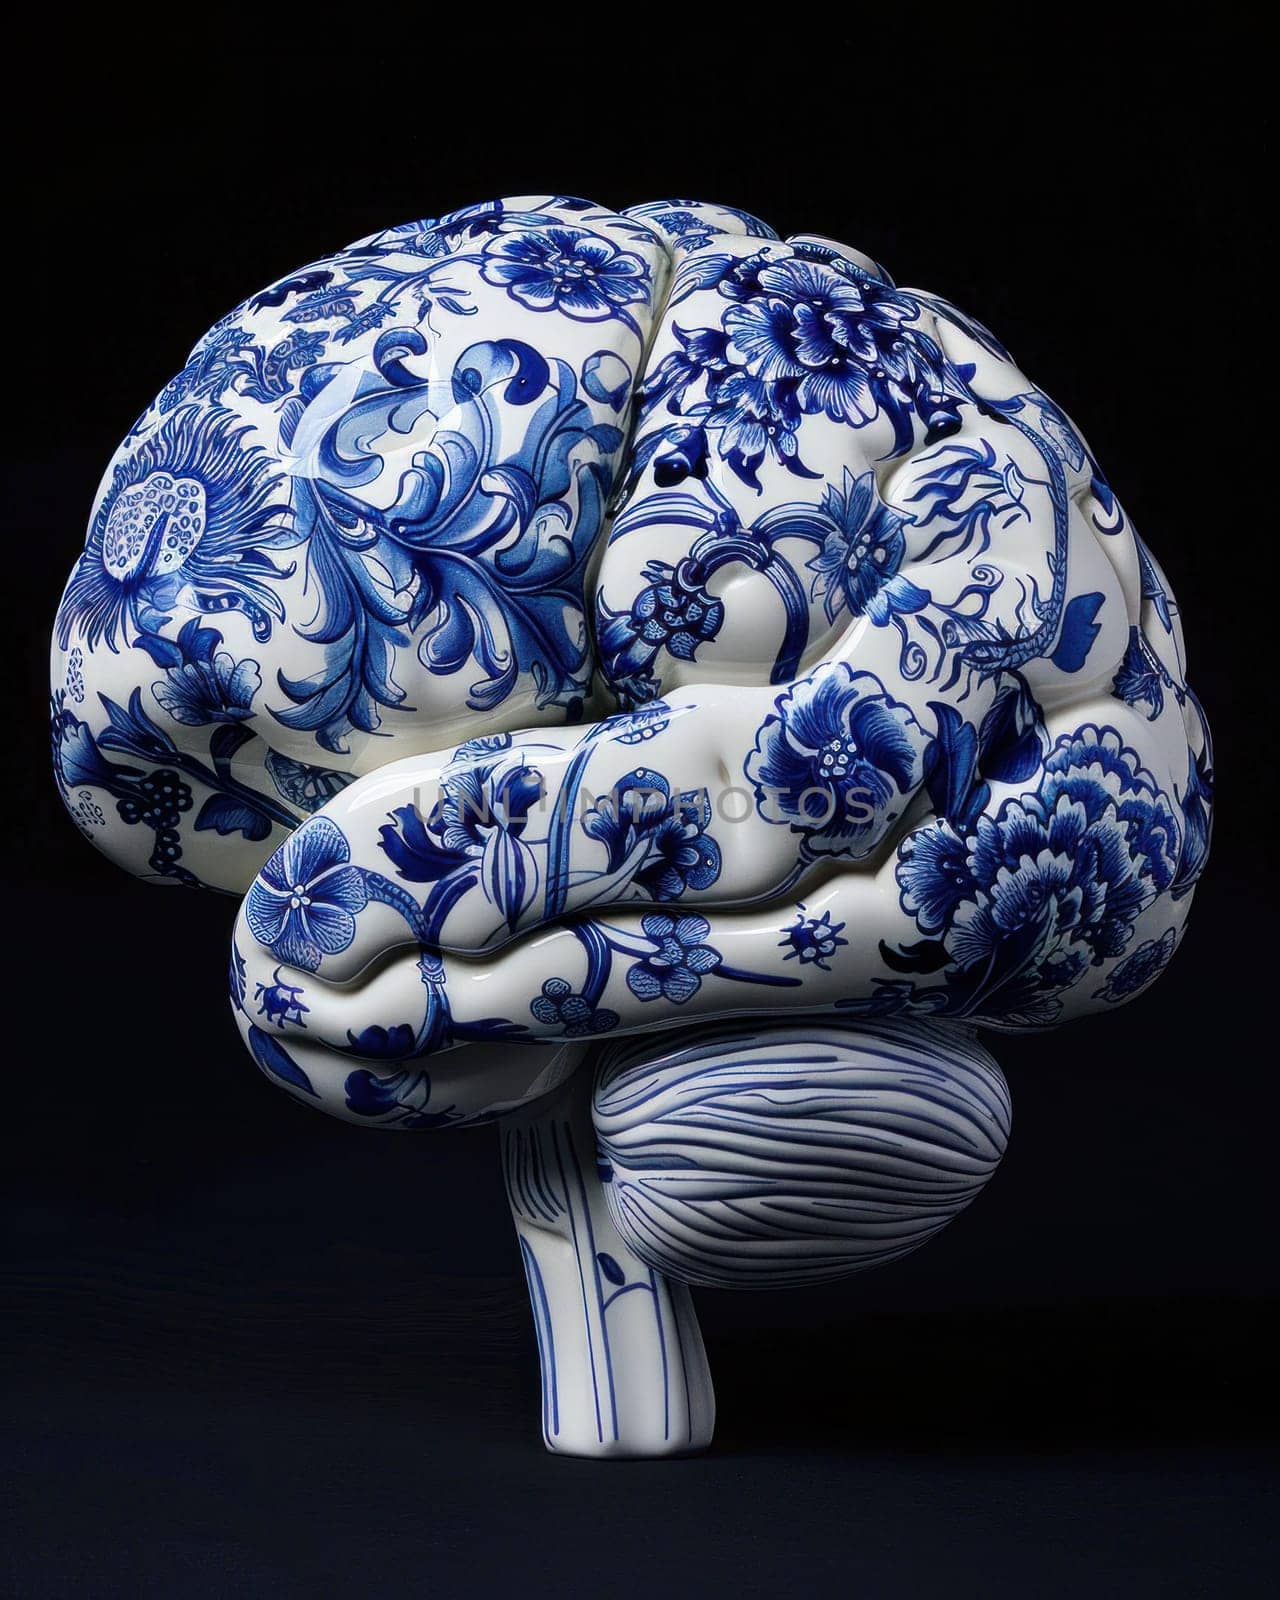 Human brain sculpture in blue and white porcelain on black background for medical and art concept